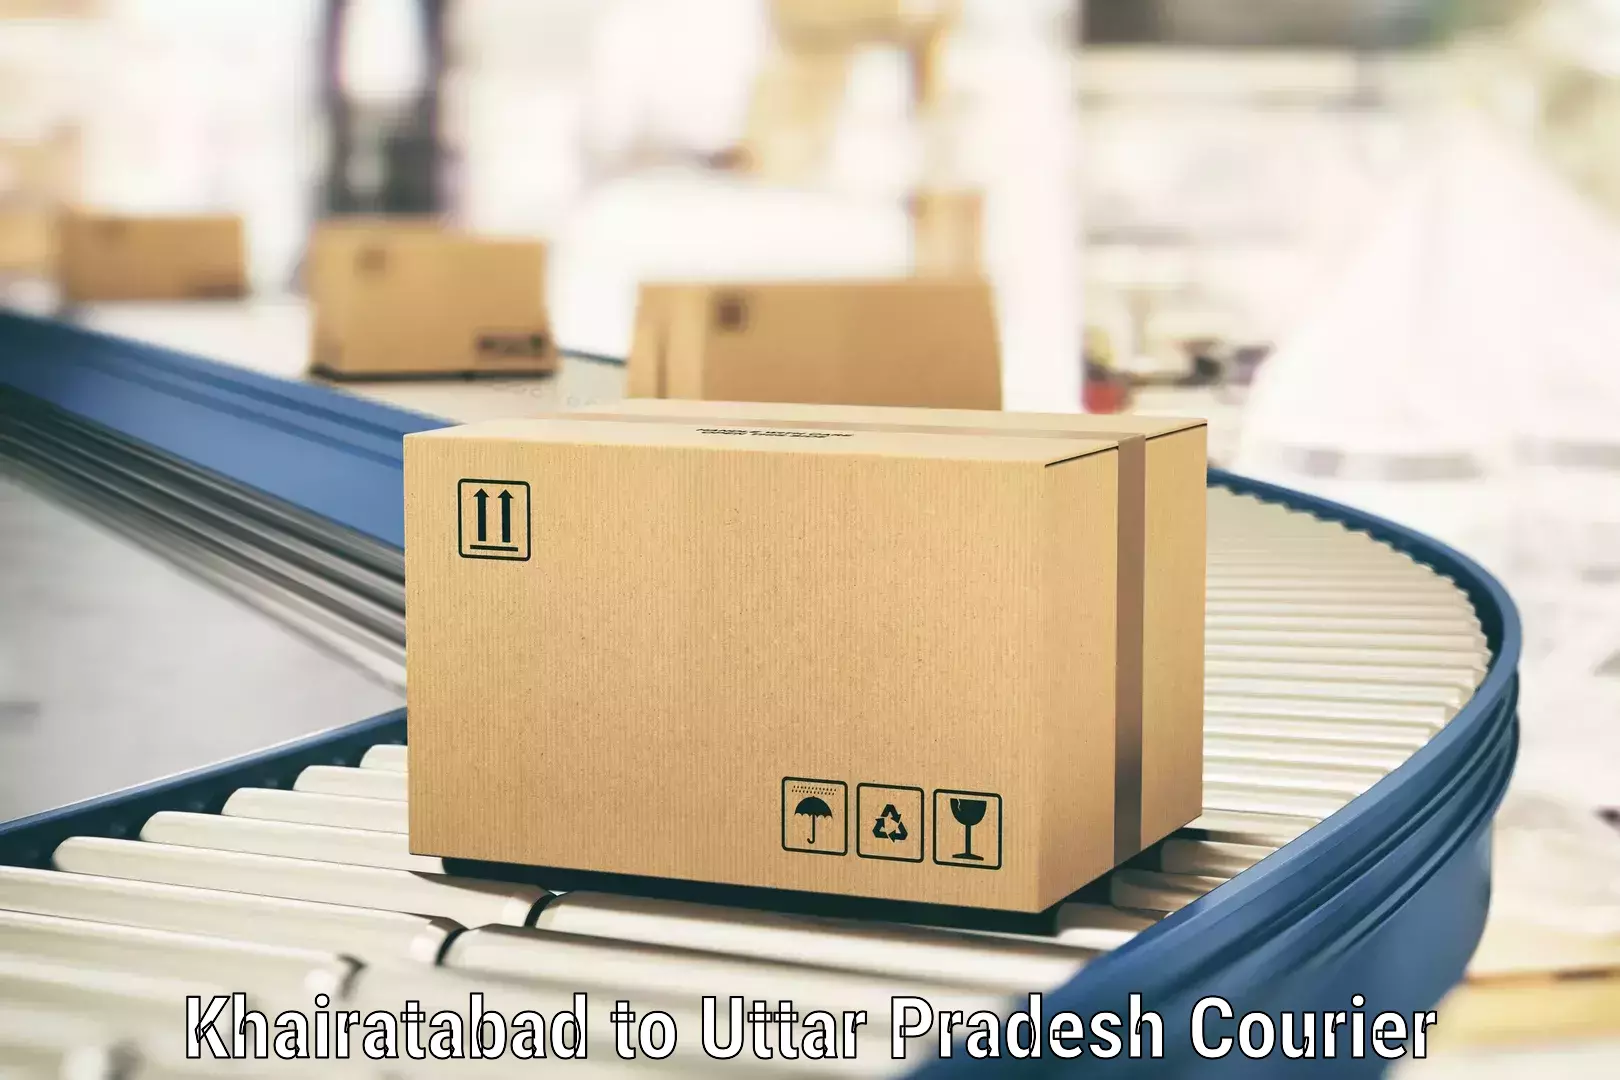 Modern delivery technologies Khairatabad to Sonbhadra